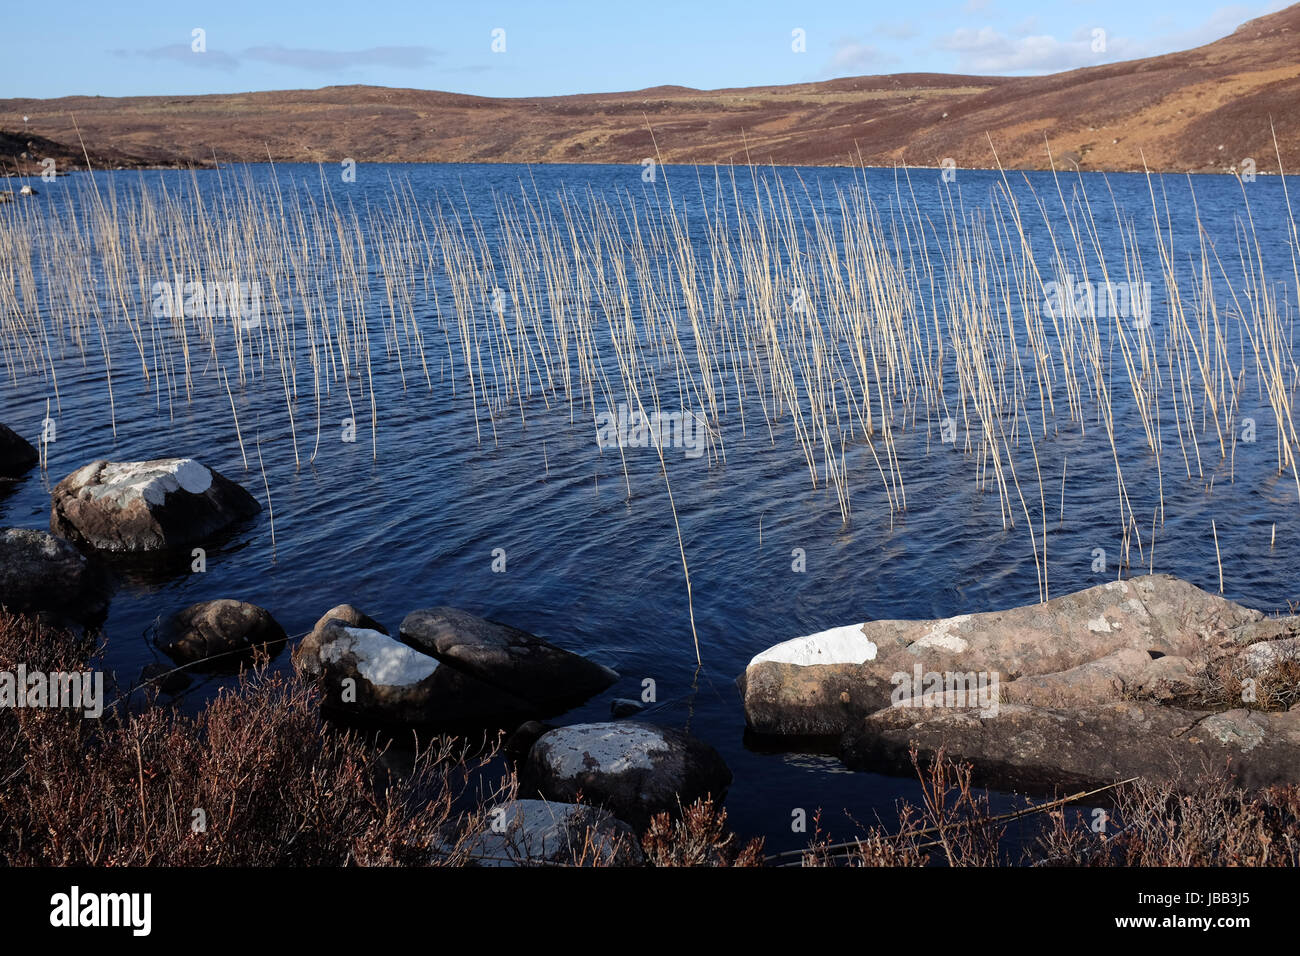 A lake environment with lichen covered rocks on the near shore leading to dried water grasses and moorland beyond. Stock Photo